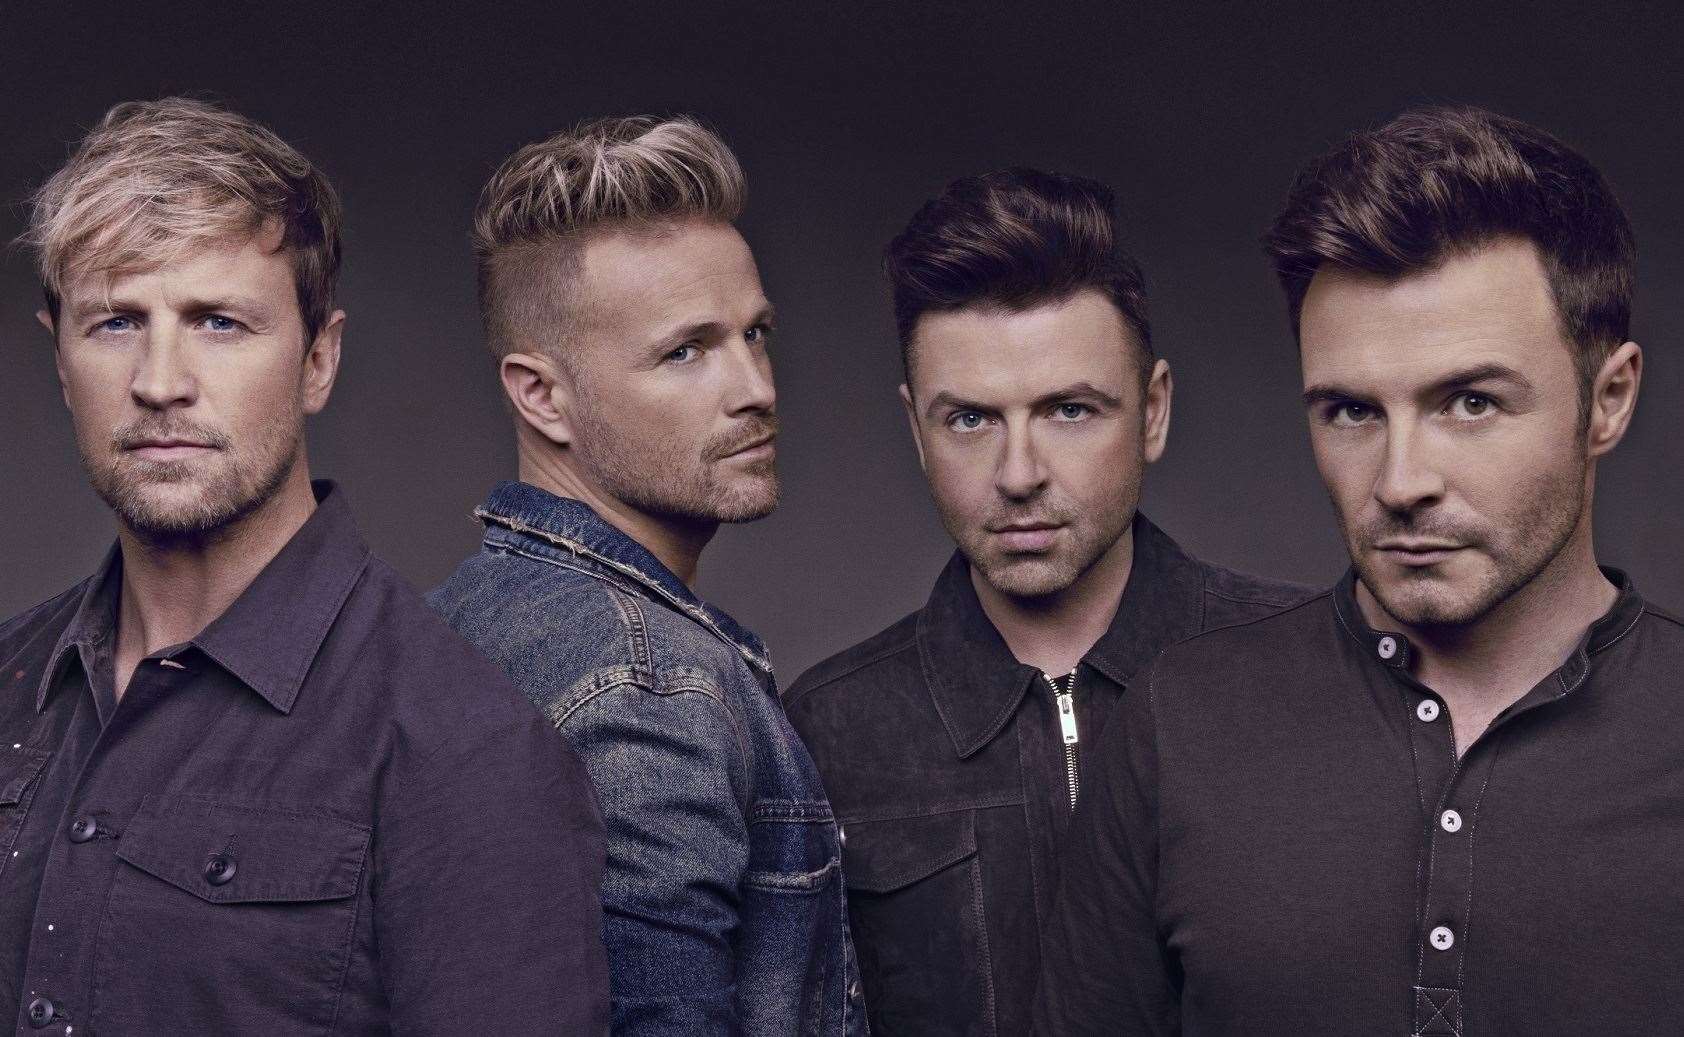 Westlife's cancellation announcement came a few hours after Little Mix's